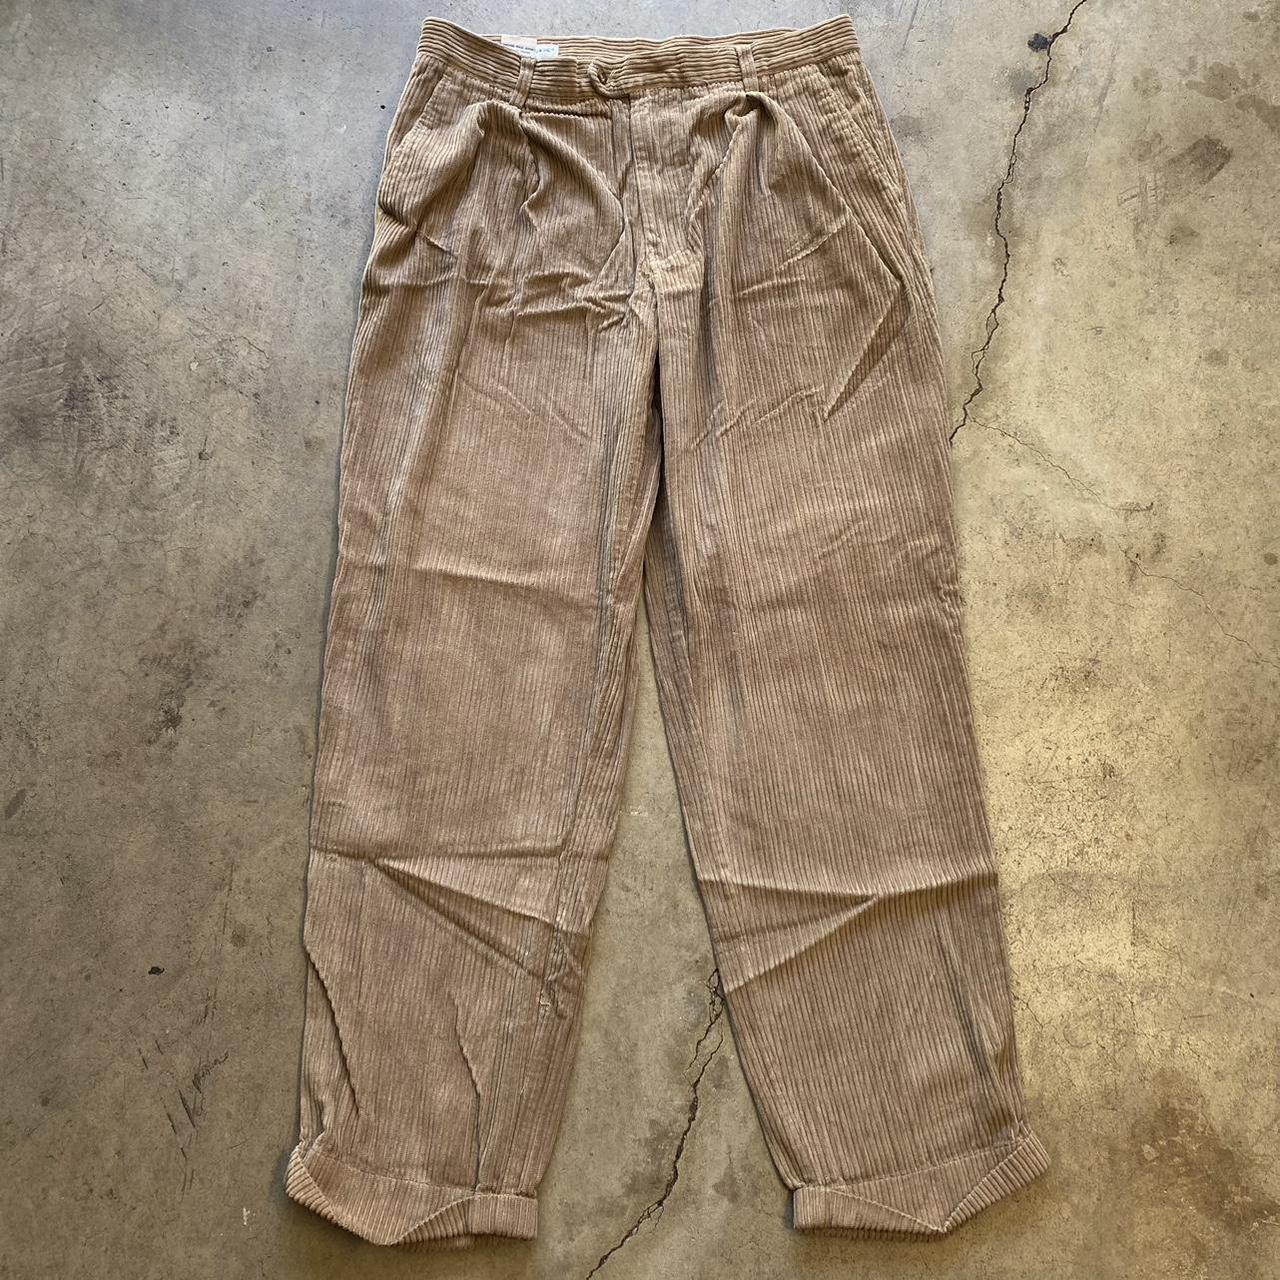 The history of corduroy - Recollections Blog